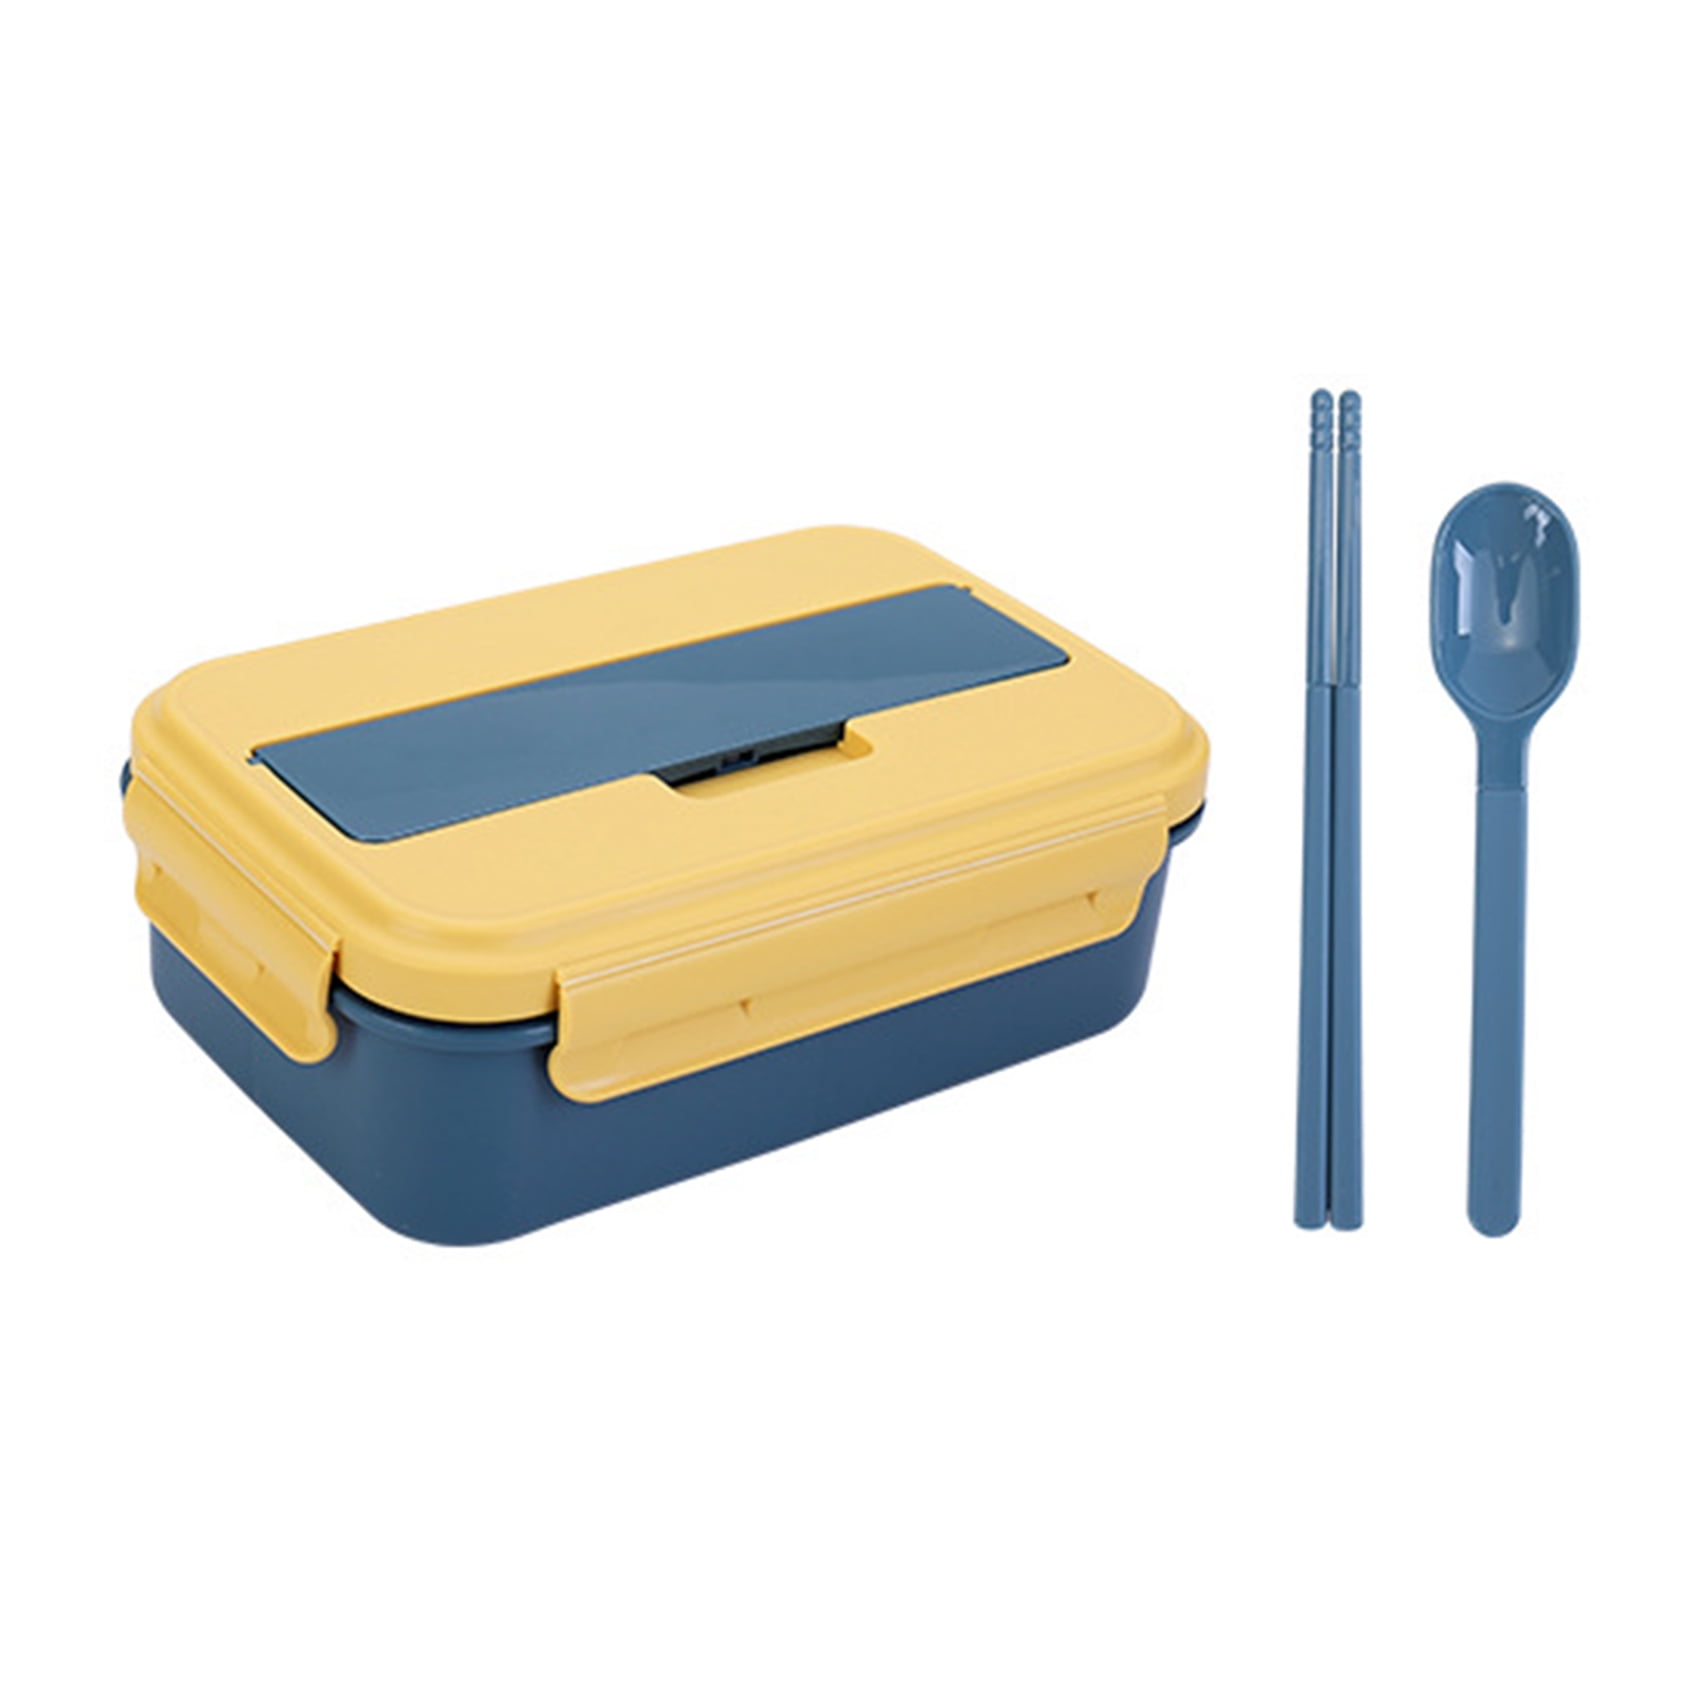 Hemoton Bento Box 2 Compartment Lunch Boxes Snack Containers with Forks Spoon Chopsticks for Kids Boys Girls Adults Blue 